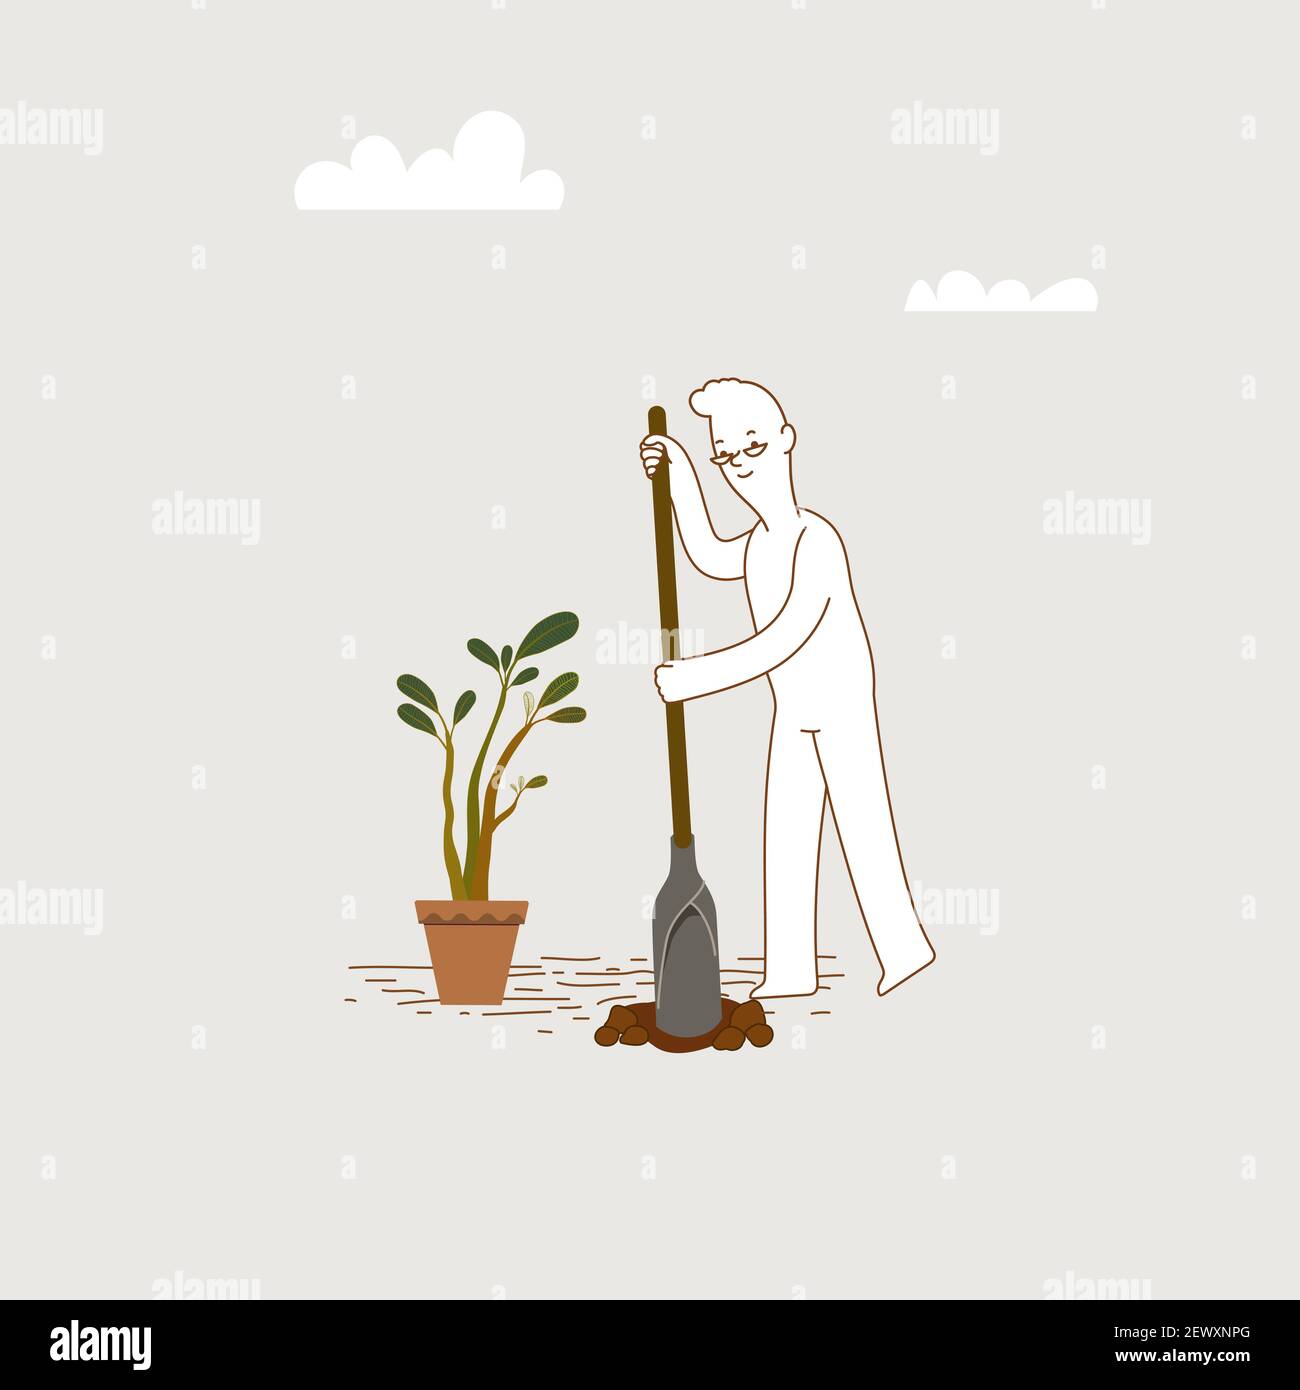 Man digging hole in the ground using shovel, preparing ground to plant the tree, small tree in the pot by his side. Stock Vector